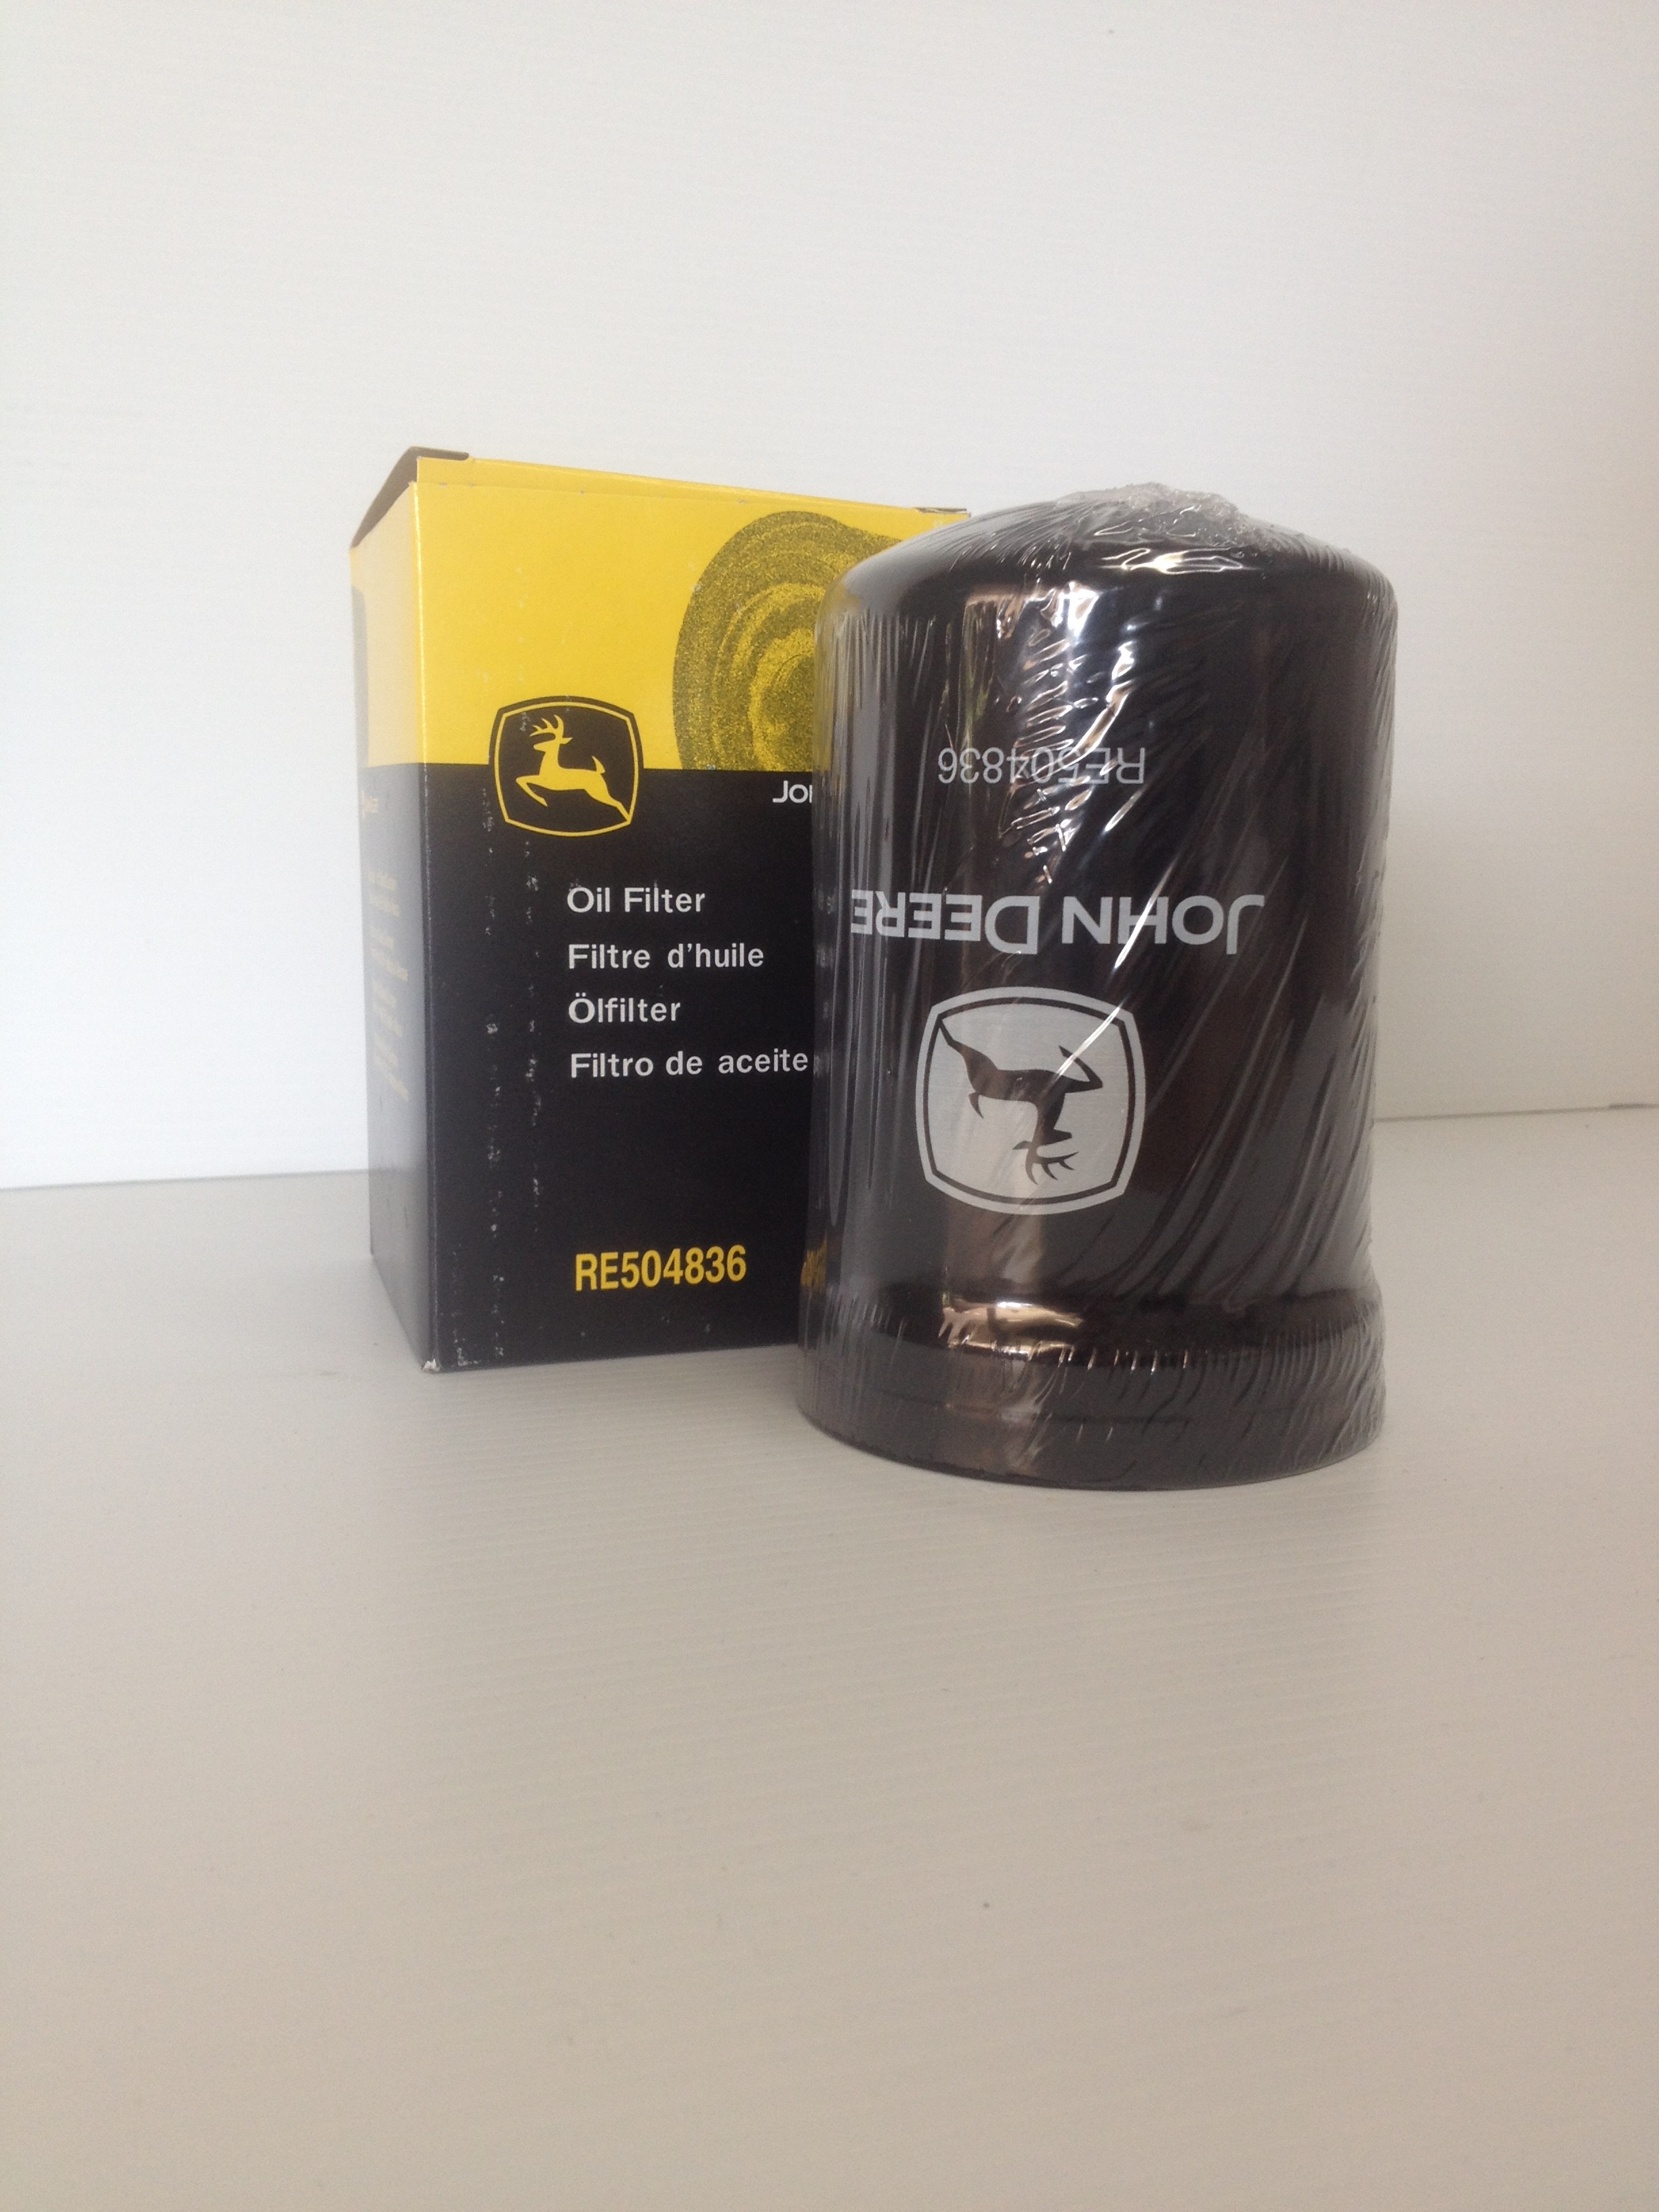 John Deere Engine: Oil Filter (RE504836) for 6230, 6330 and 6430 ...